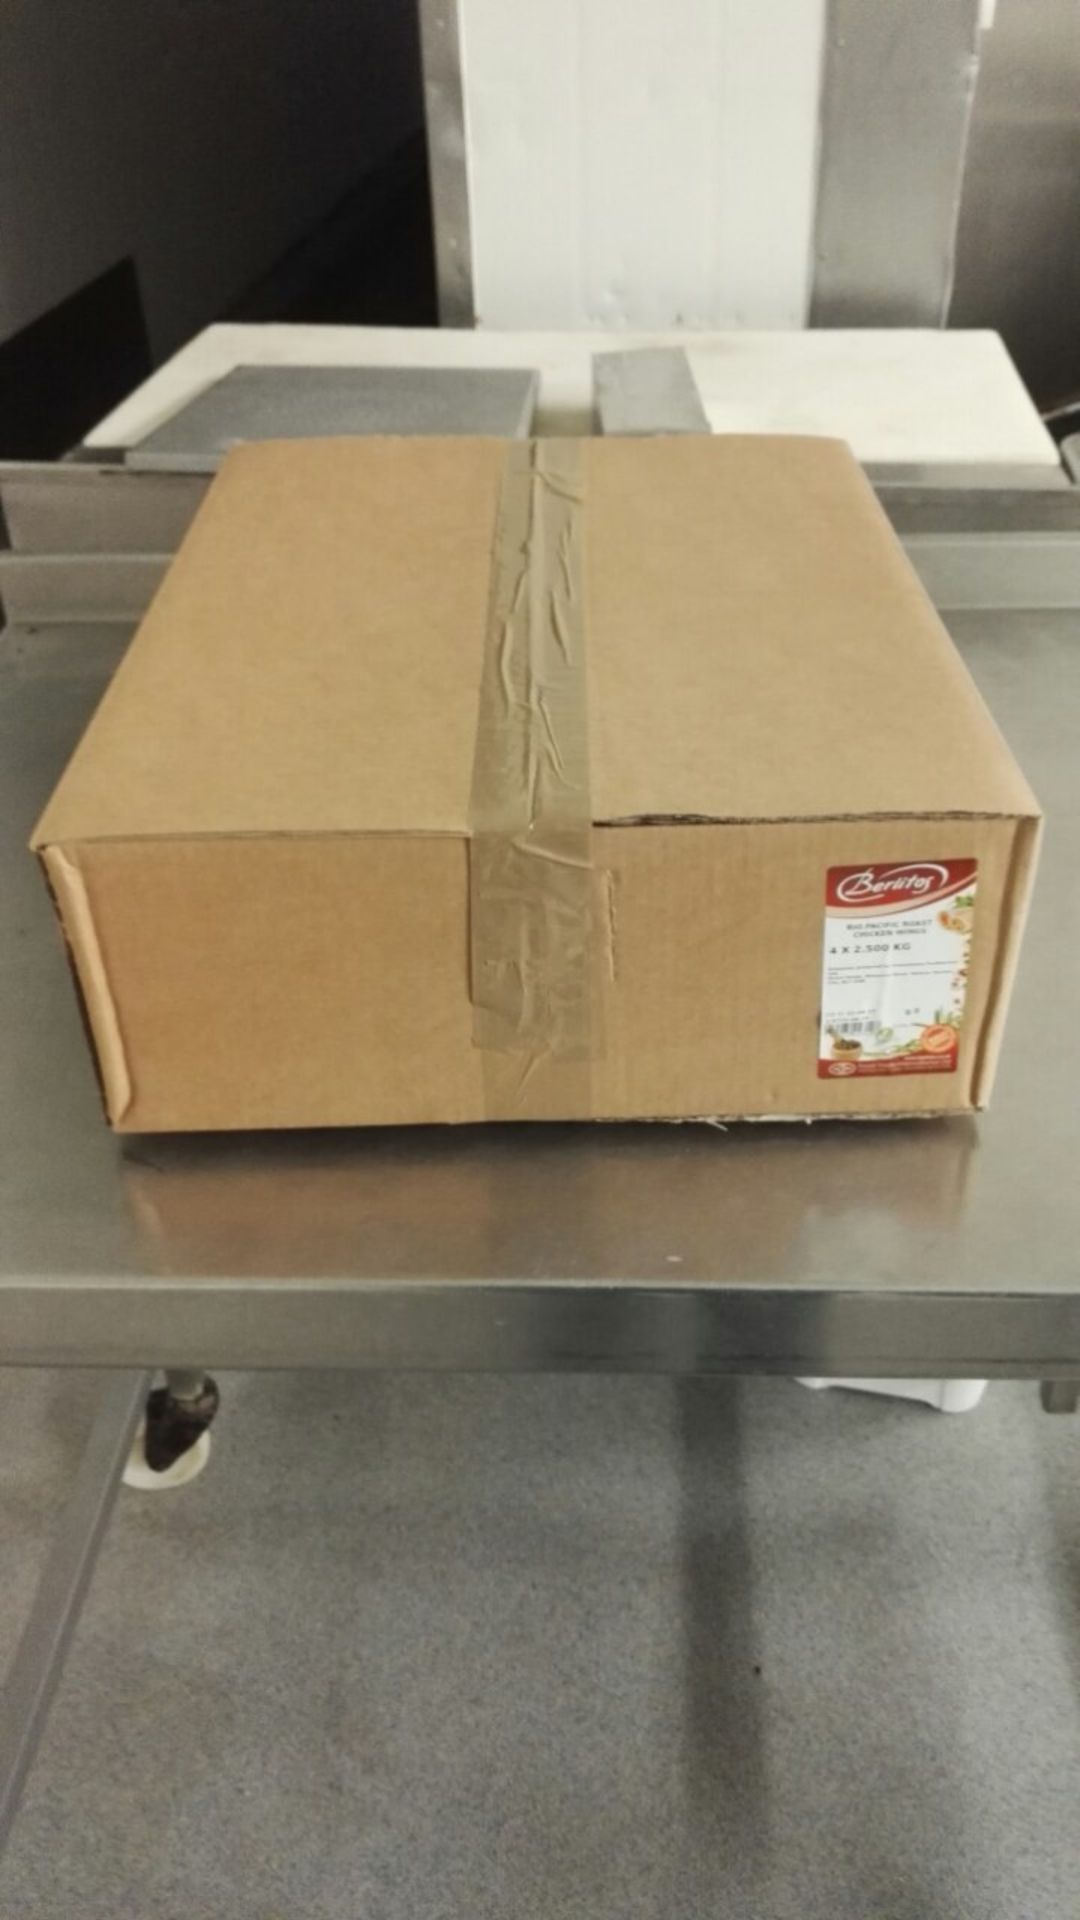 1 x pallet of Rio Pacific Roasted Chicken joint wings (Frozen) - Image 4 of 4